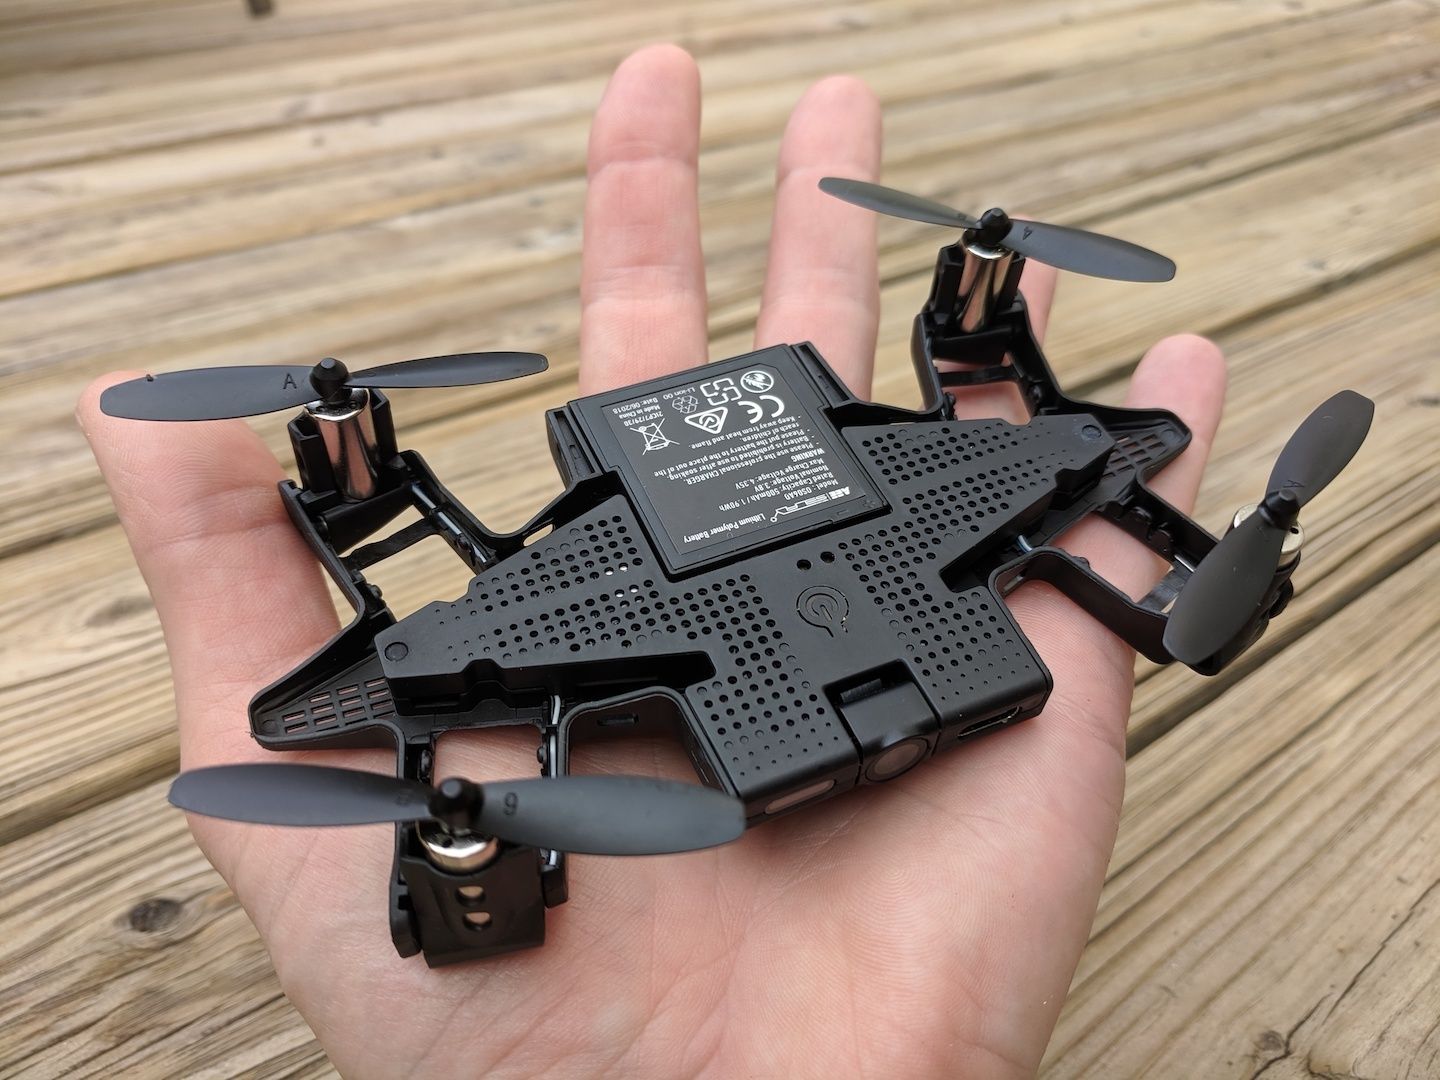 Small black drone in a palm of a hand